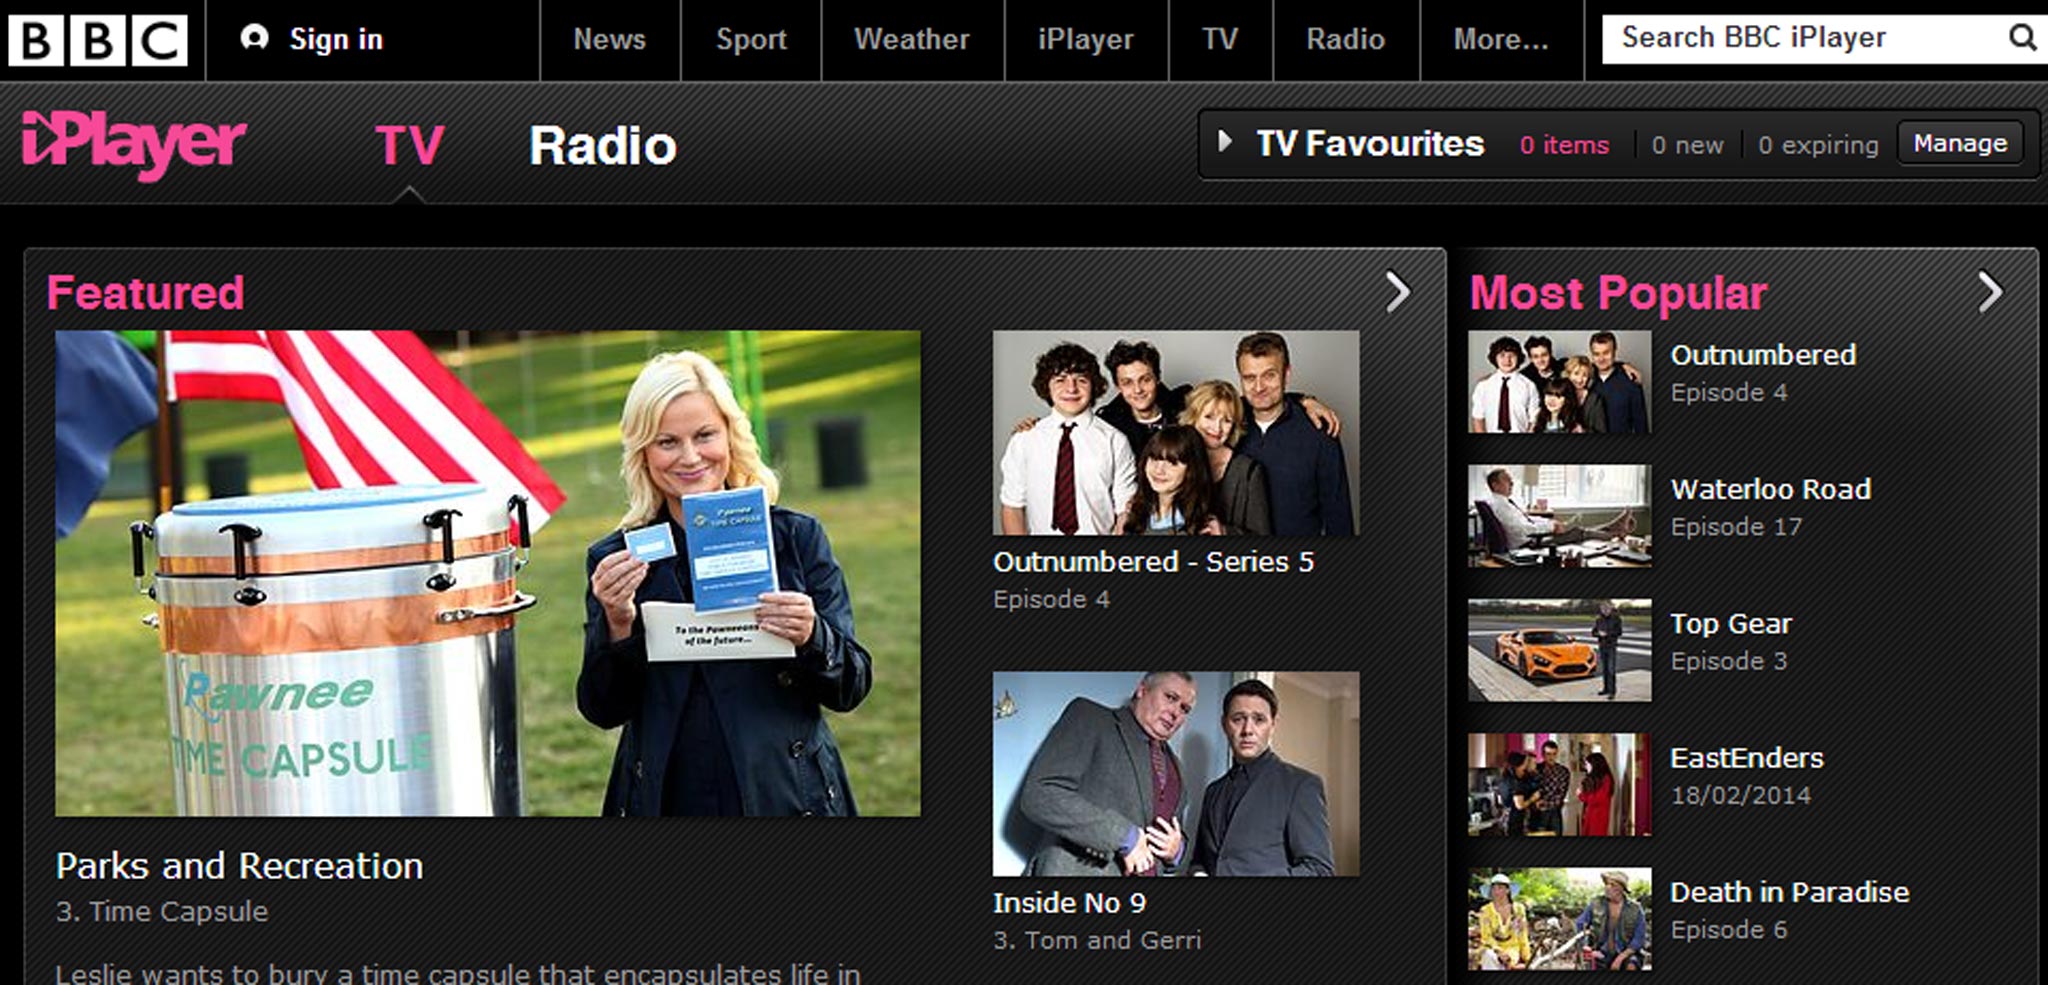 People will now be able to listen to Radio 1 on BBC iPlayer